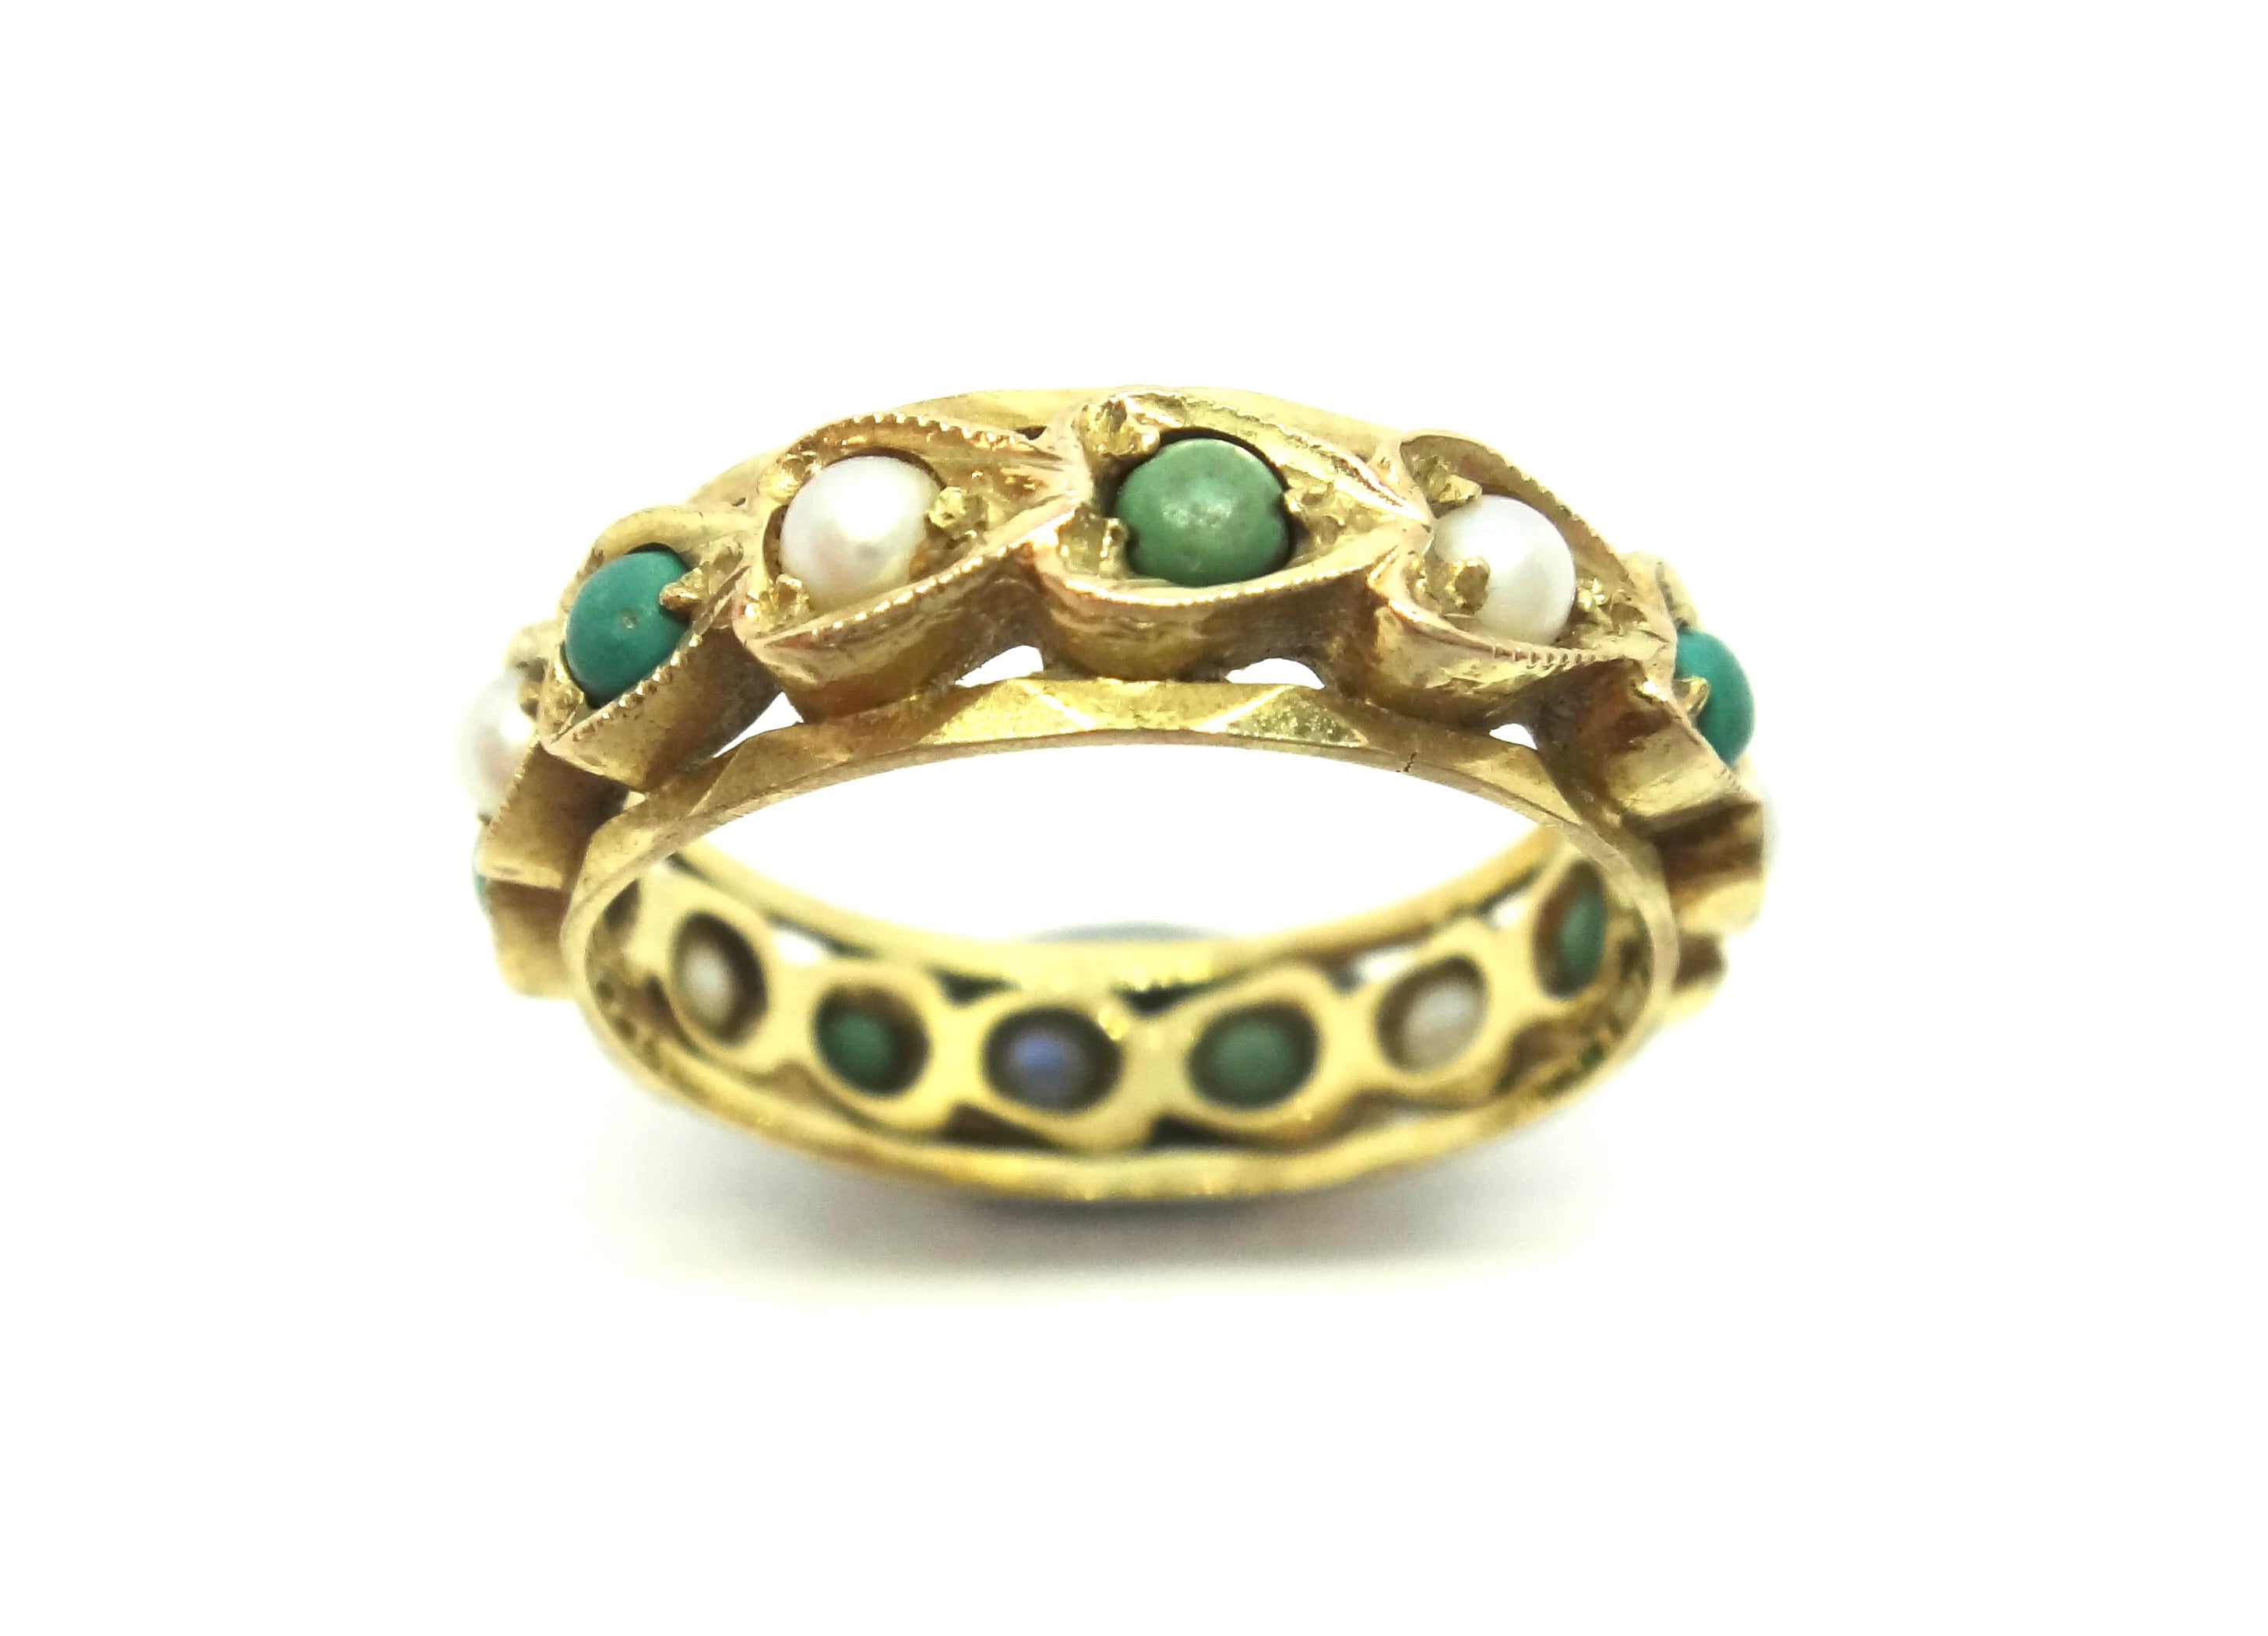 ANTIQUE Style 9ct Yellow Gold, Turquoise & Pearl Eternity Ring c.1970